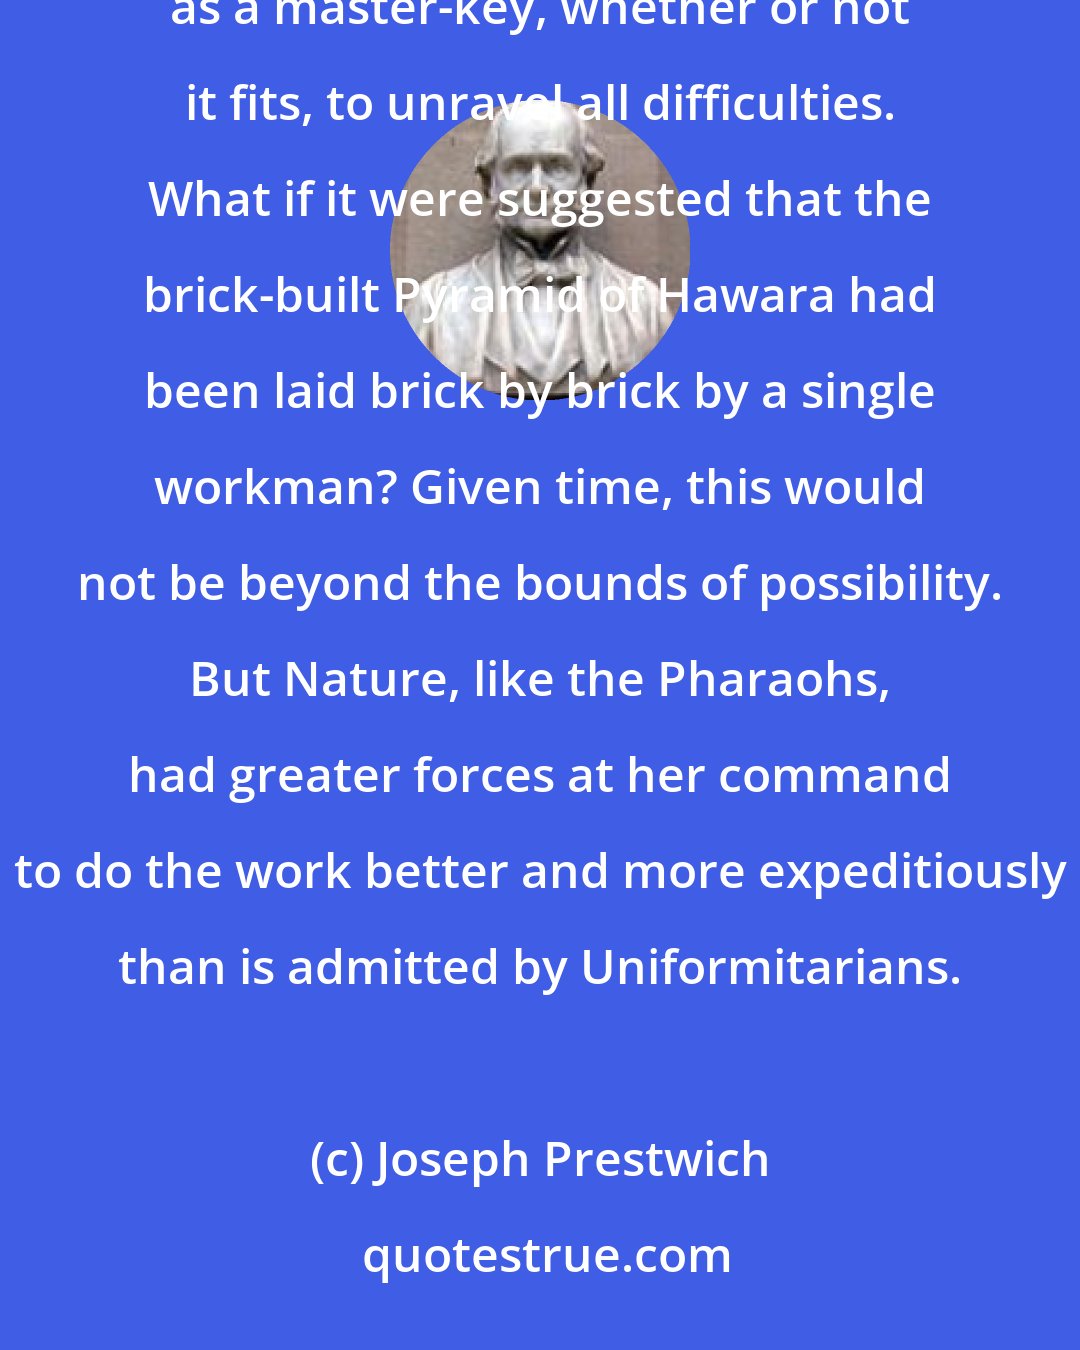 Joseph Prestwich: Time is in itself [not] a difficulty, but a time-rate, assumed on very insufficient grounds, is used as a master-key, whether or not it fits, to unravel all difficulties. What if it were suggested that the brick-built Pyramid of Hawara had been laid brick by brick by a single workman? Given time, this would not be beyond the bounds of possibility. But Nature, like the Pharaohs, had greater forces at her command to do the work better and more expeditiously than is admitted by Uniformitarians.